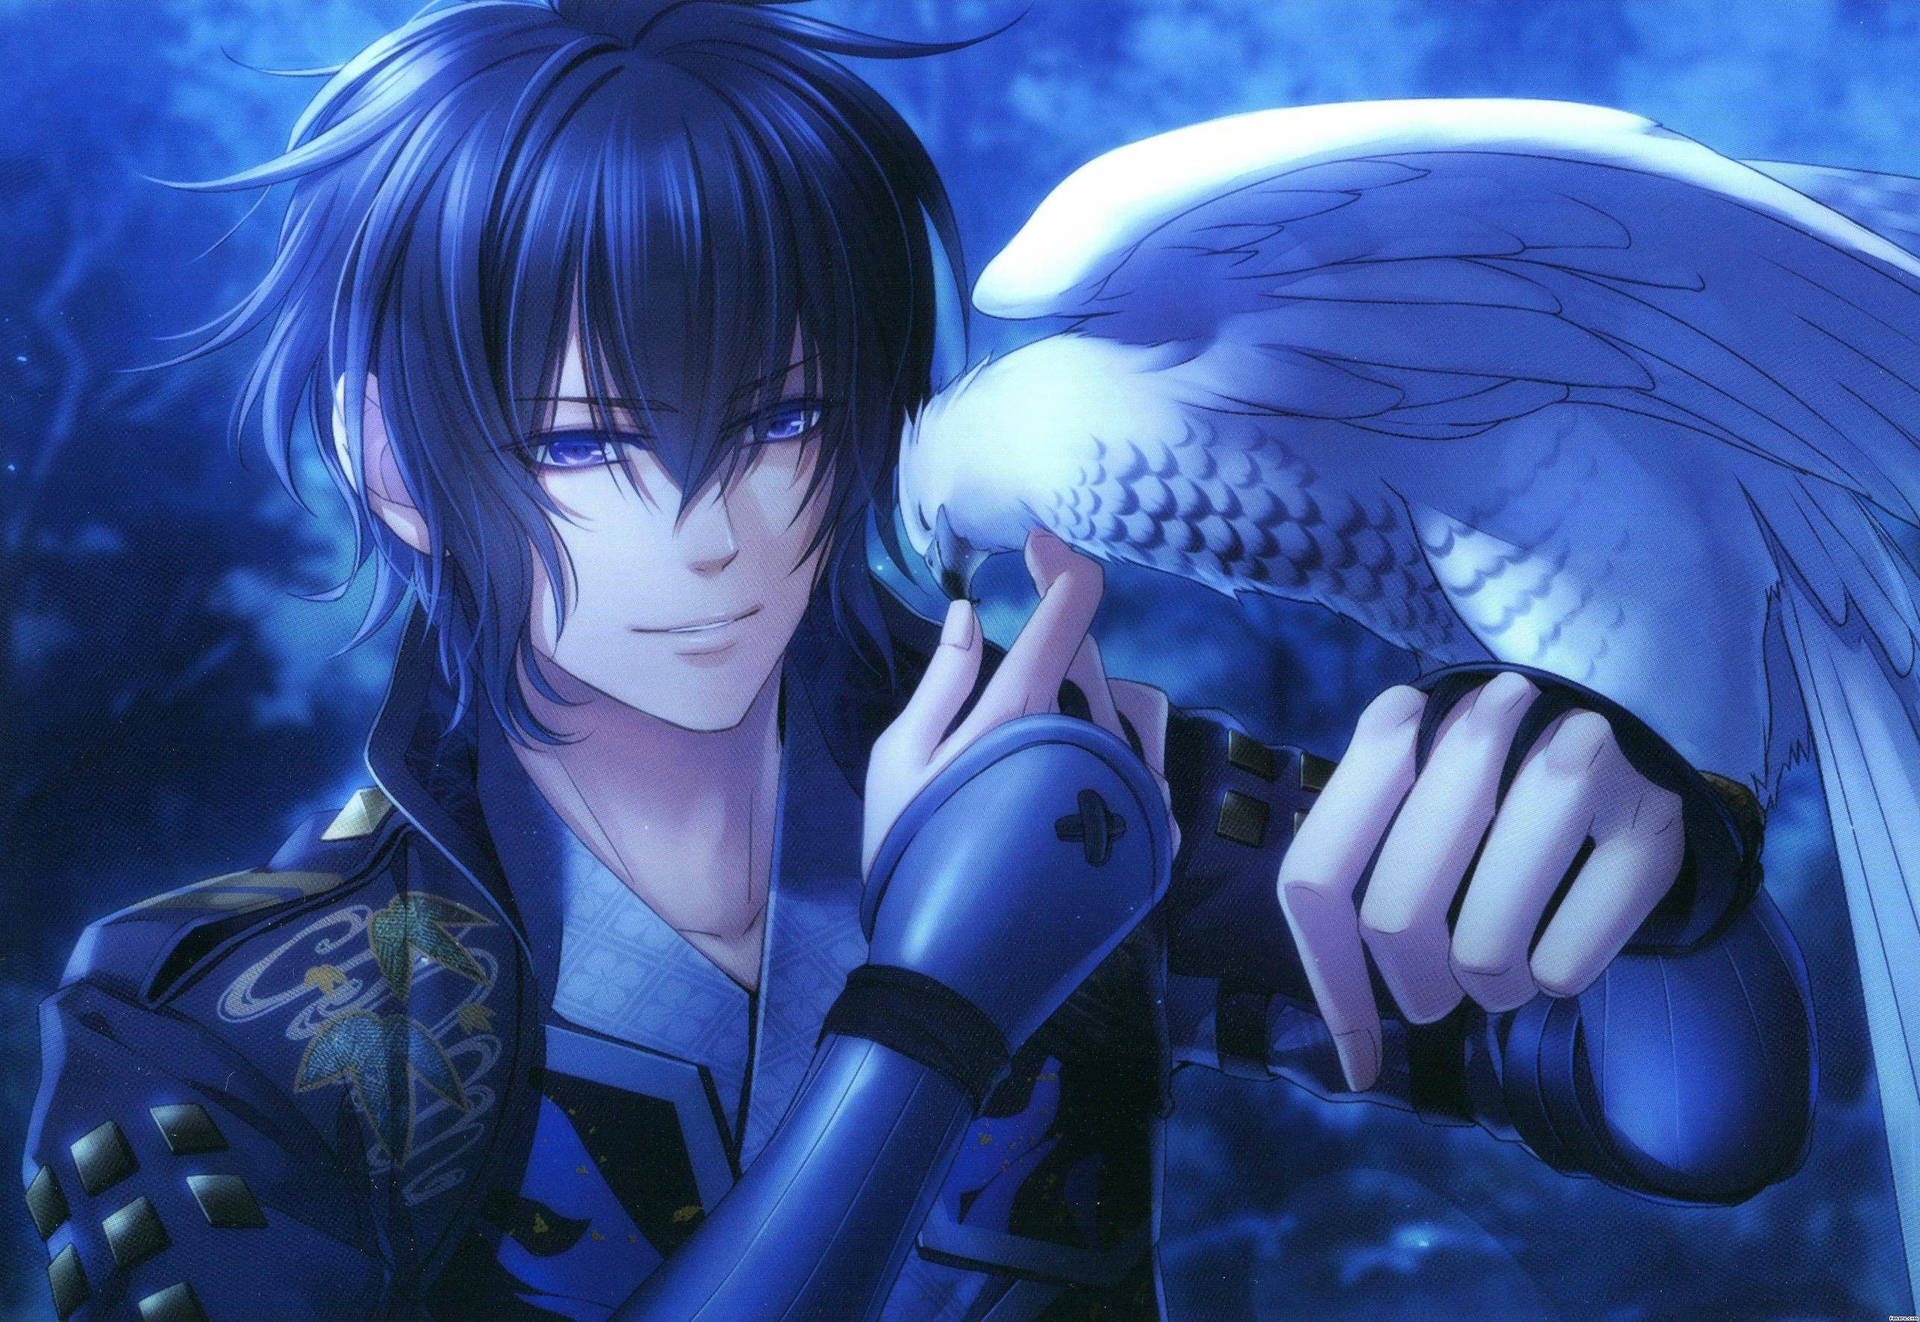 Anime Blue Boy With An Eagle Wallpaper